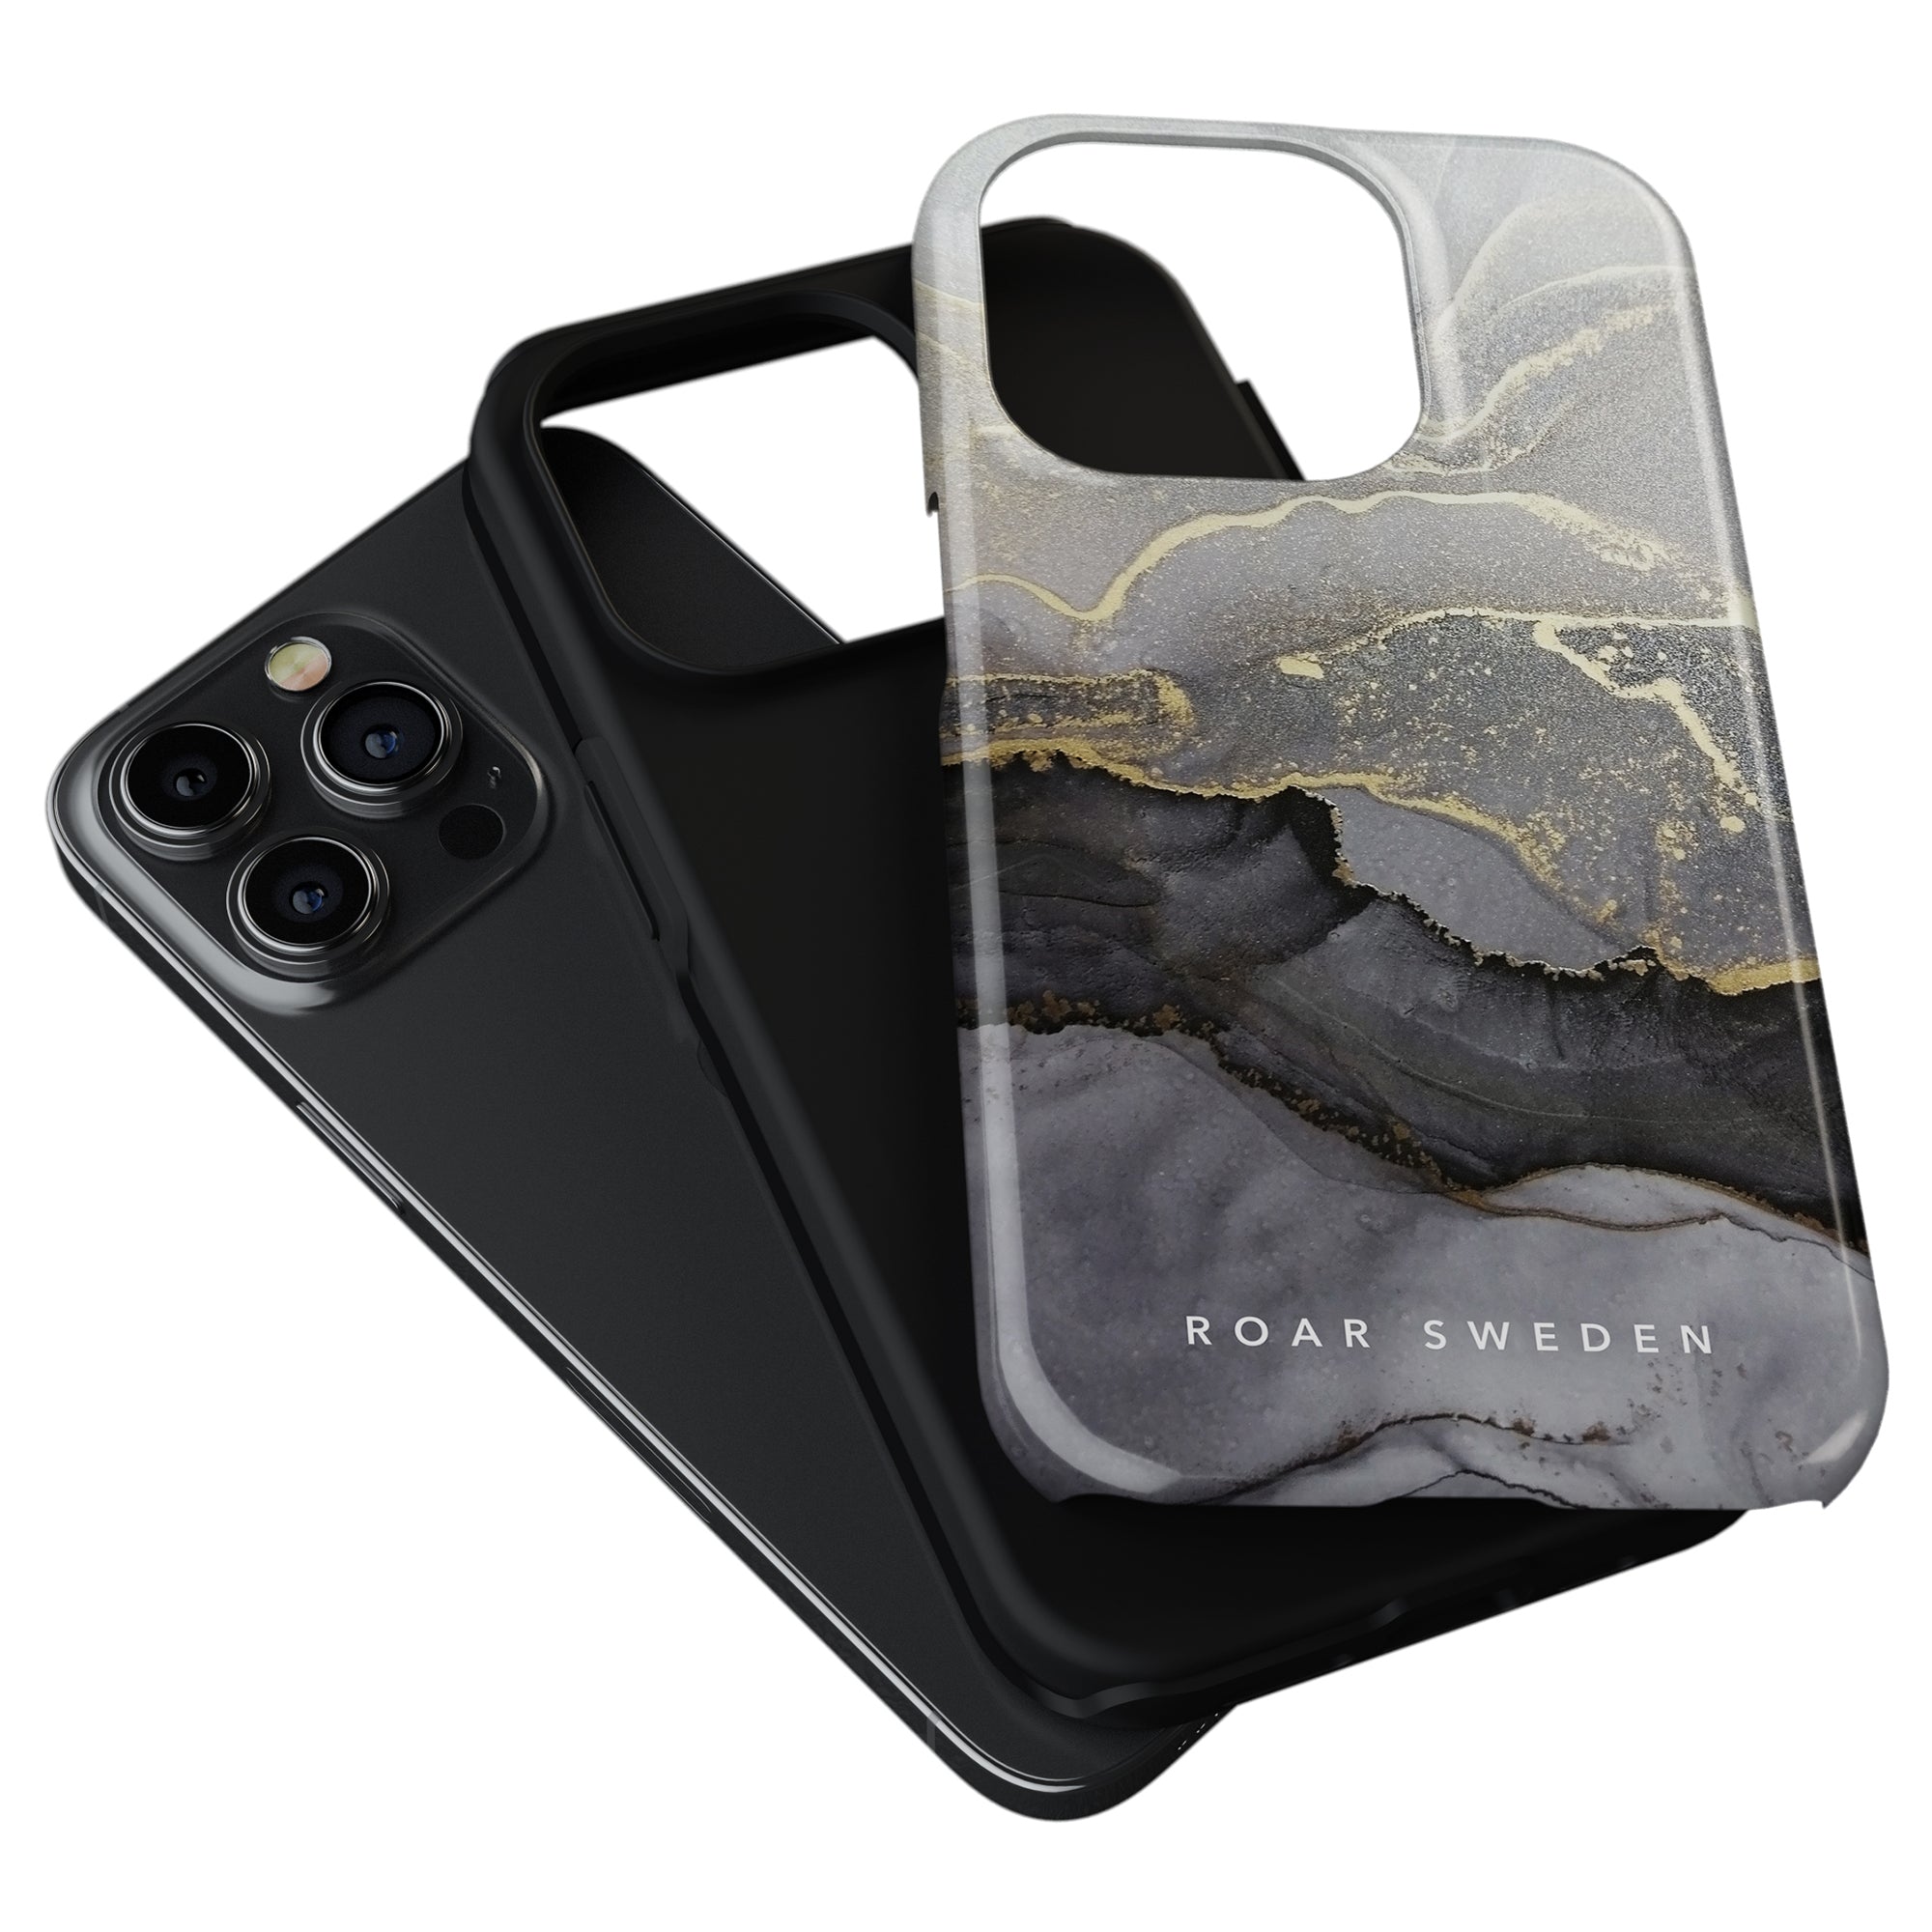 A Roar Swedens black and gold marble case, the Sparkle - Tough Case, is sure to become your mobilskyddsfavorit for the iPhone 11.